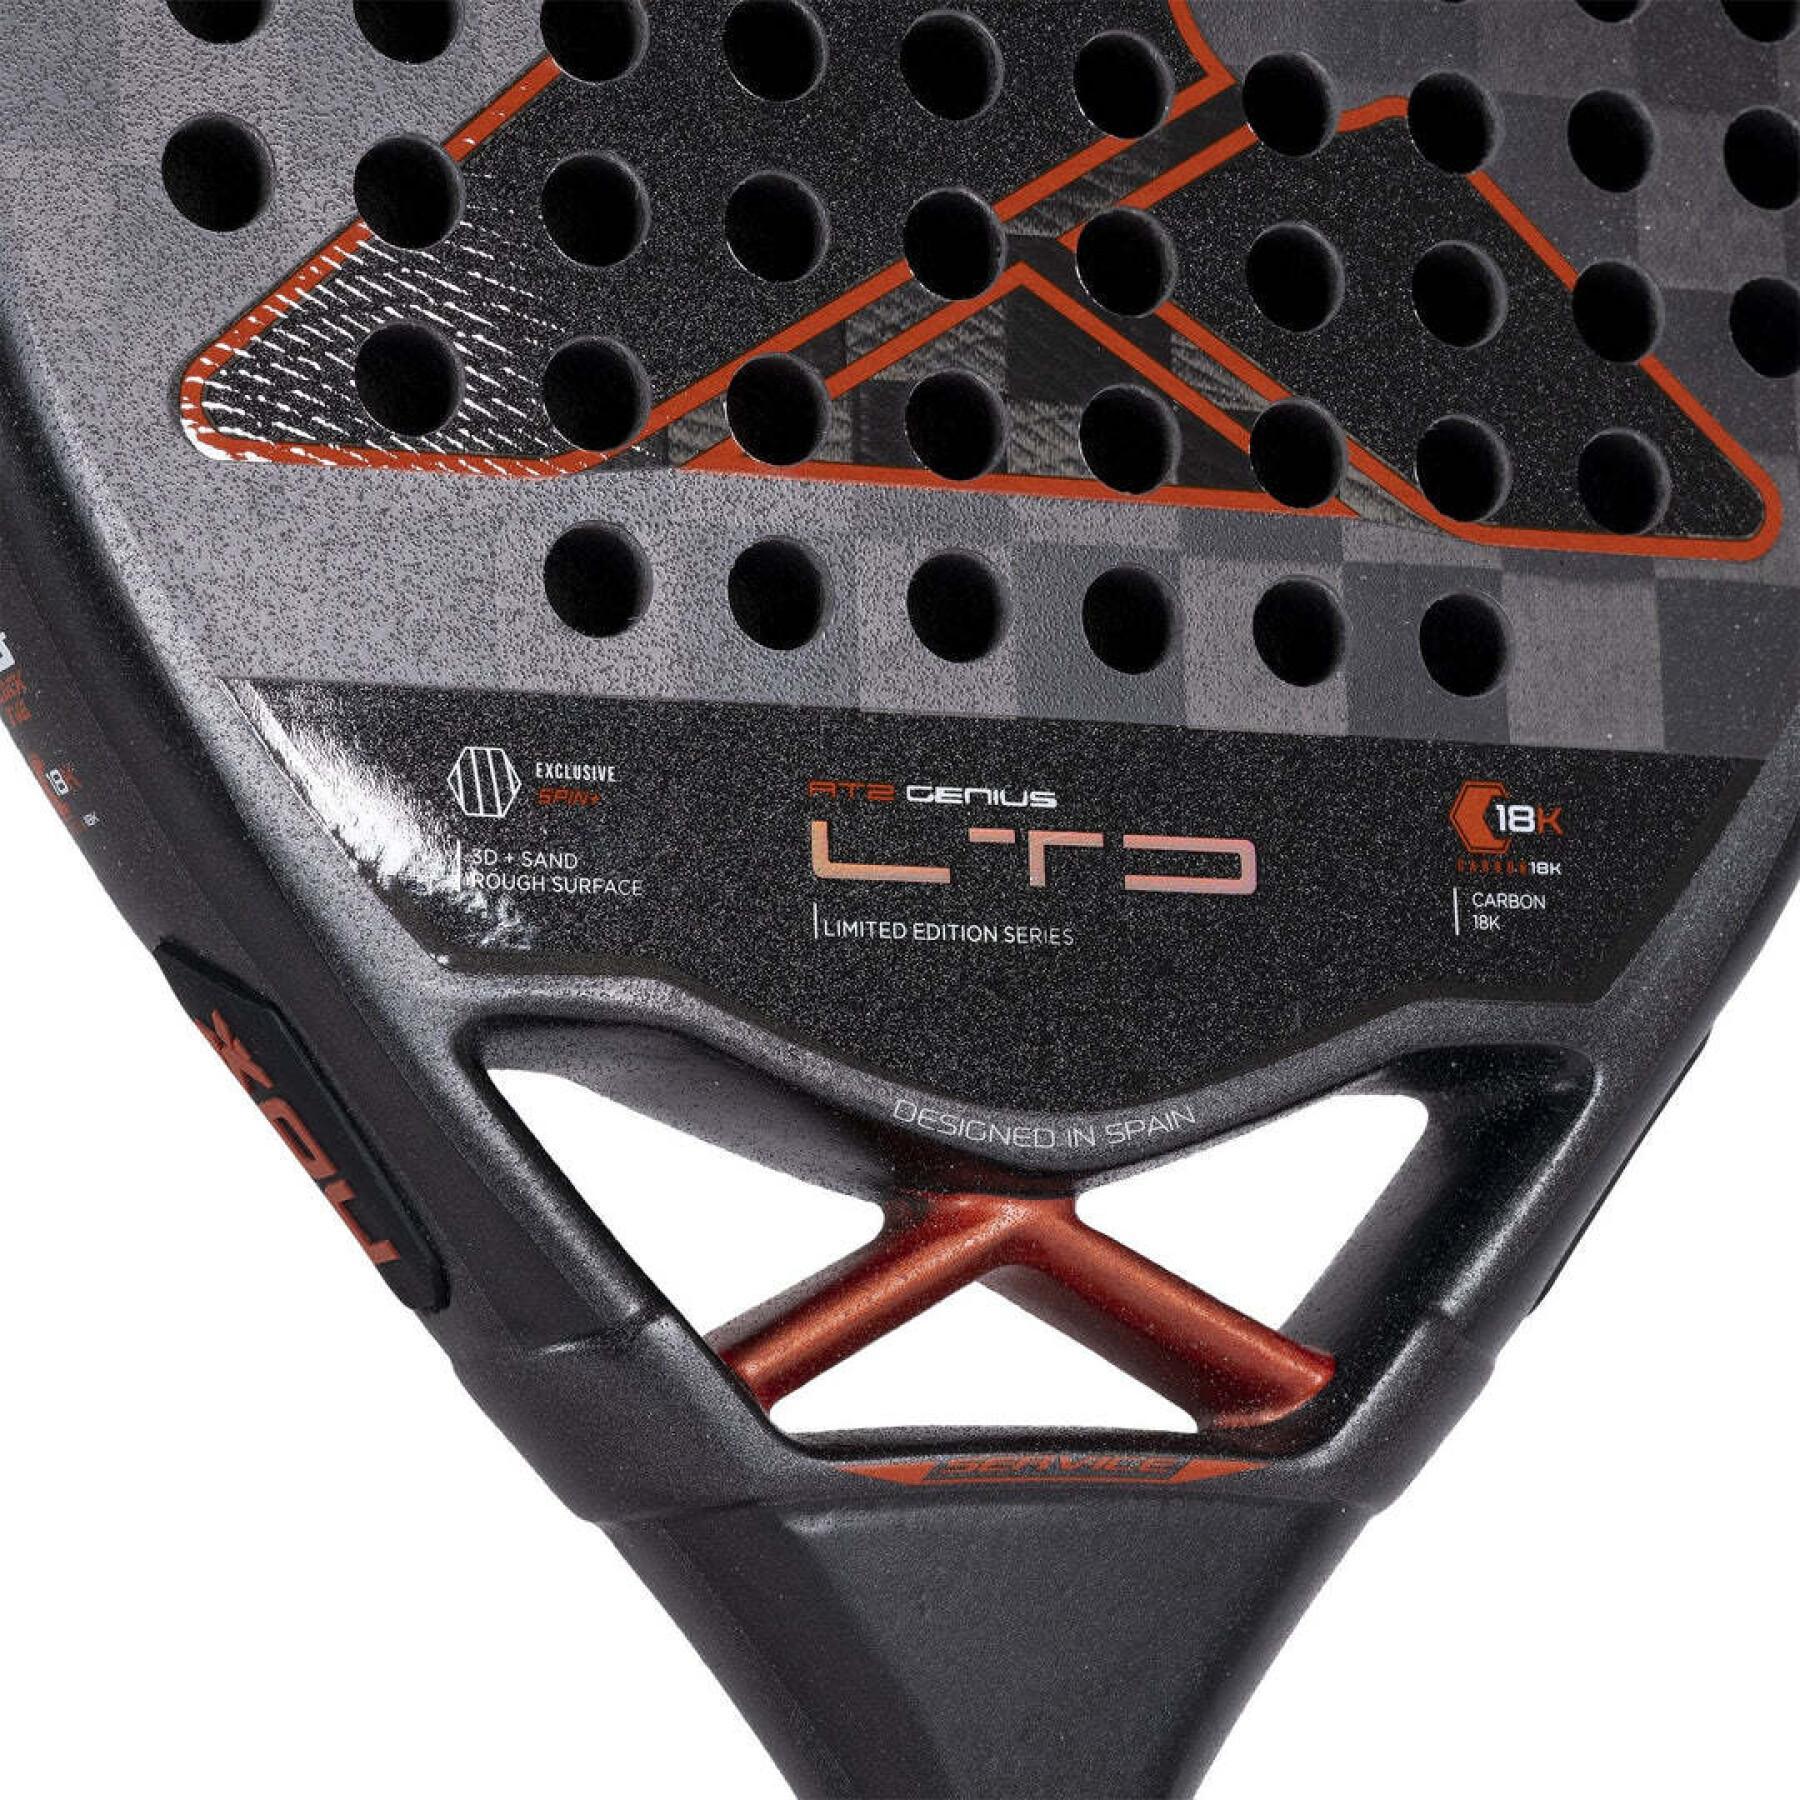 Racket from padel Nox Genius Limited Edition 23